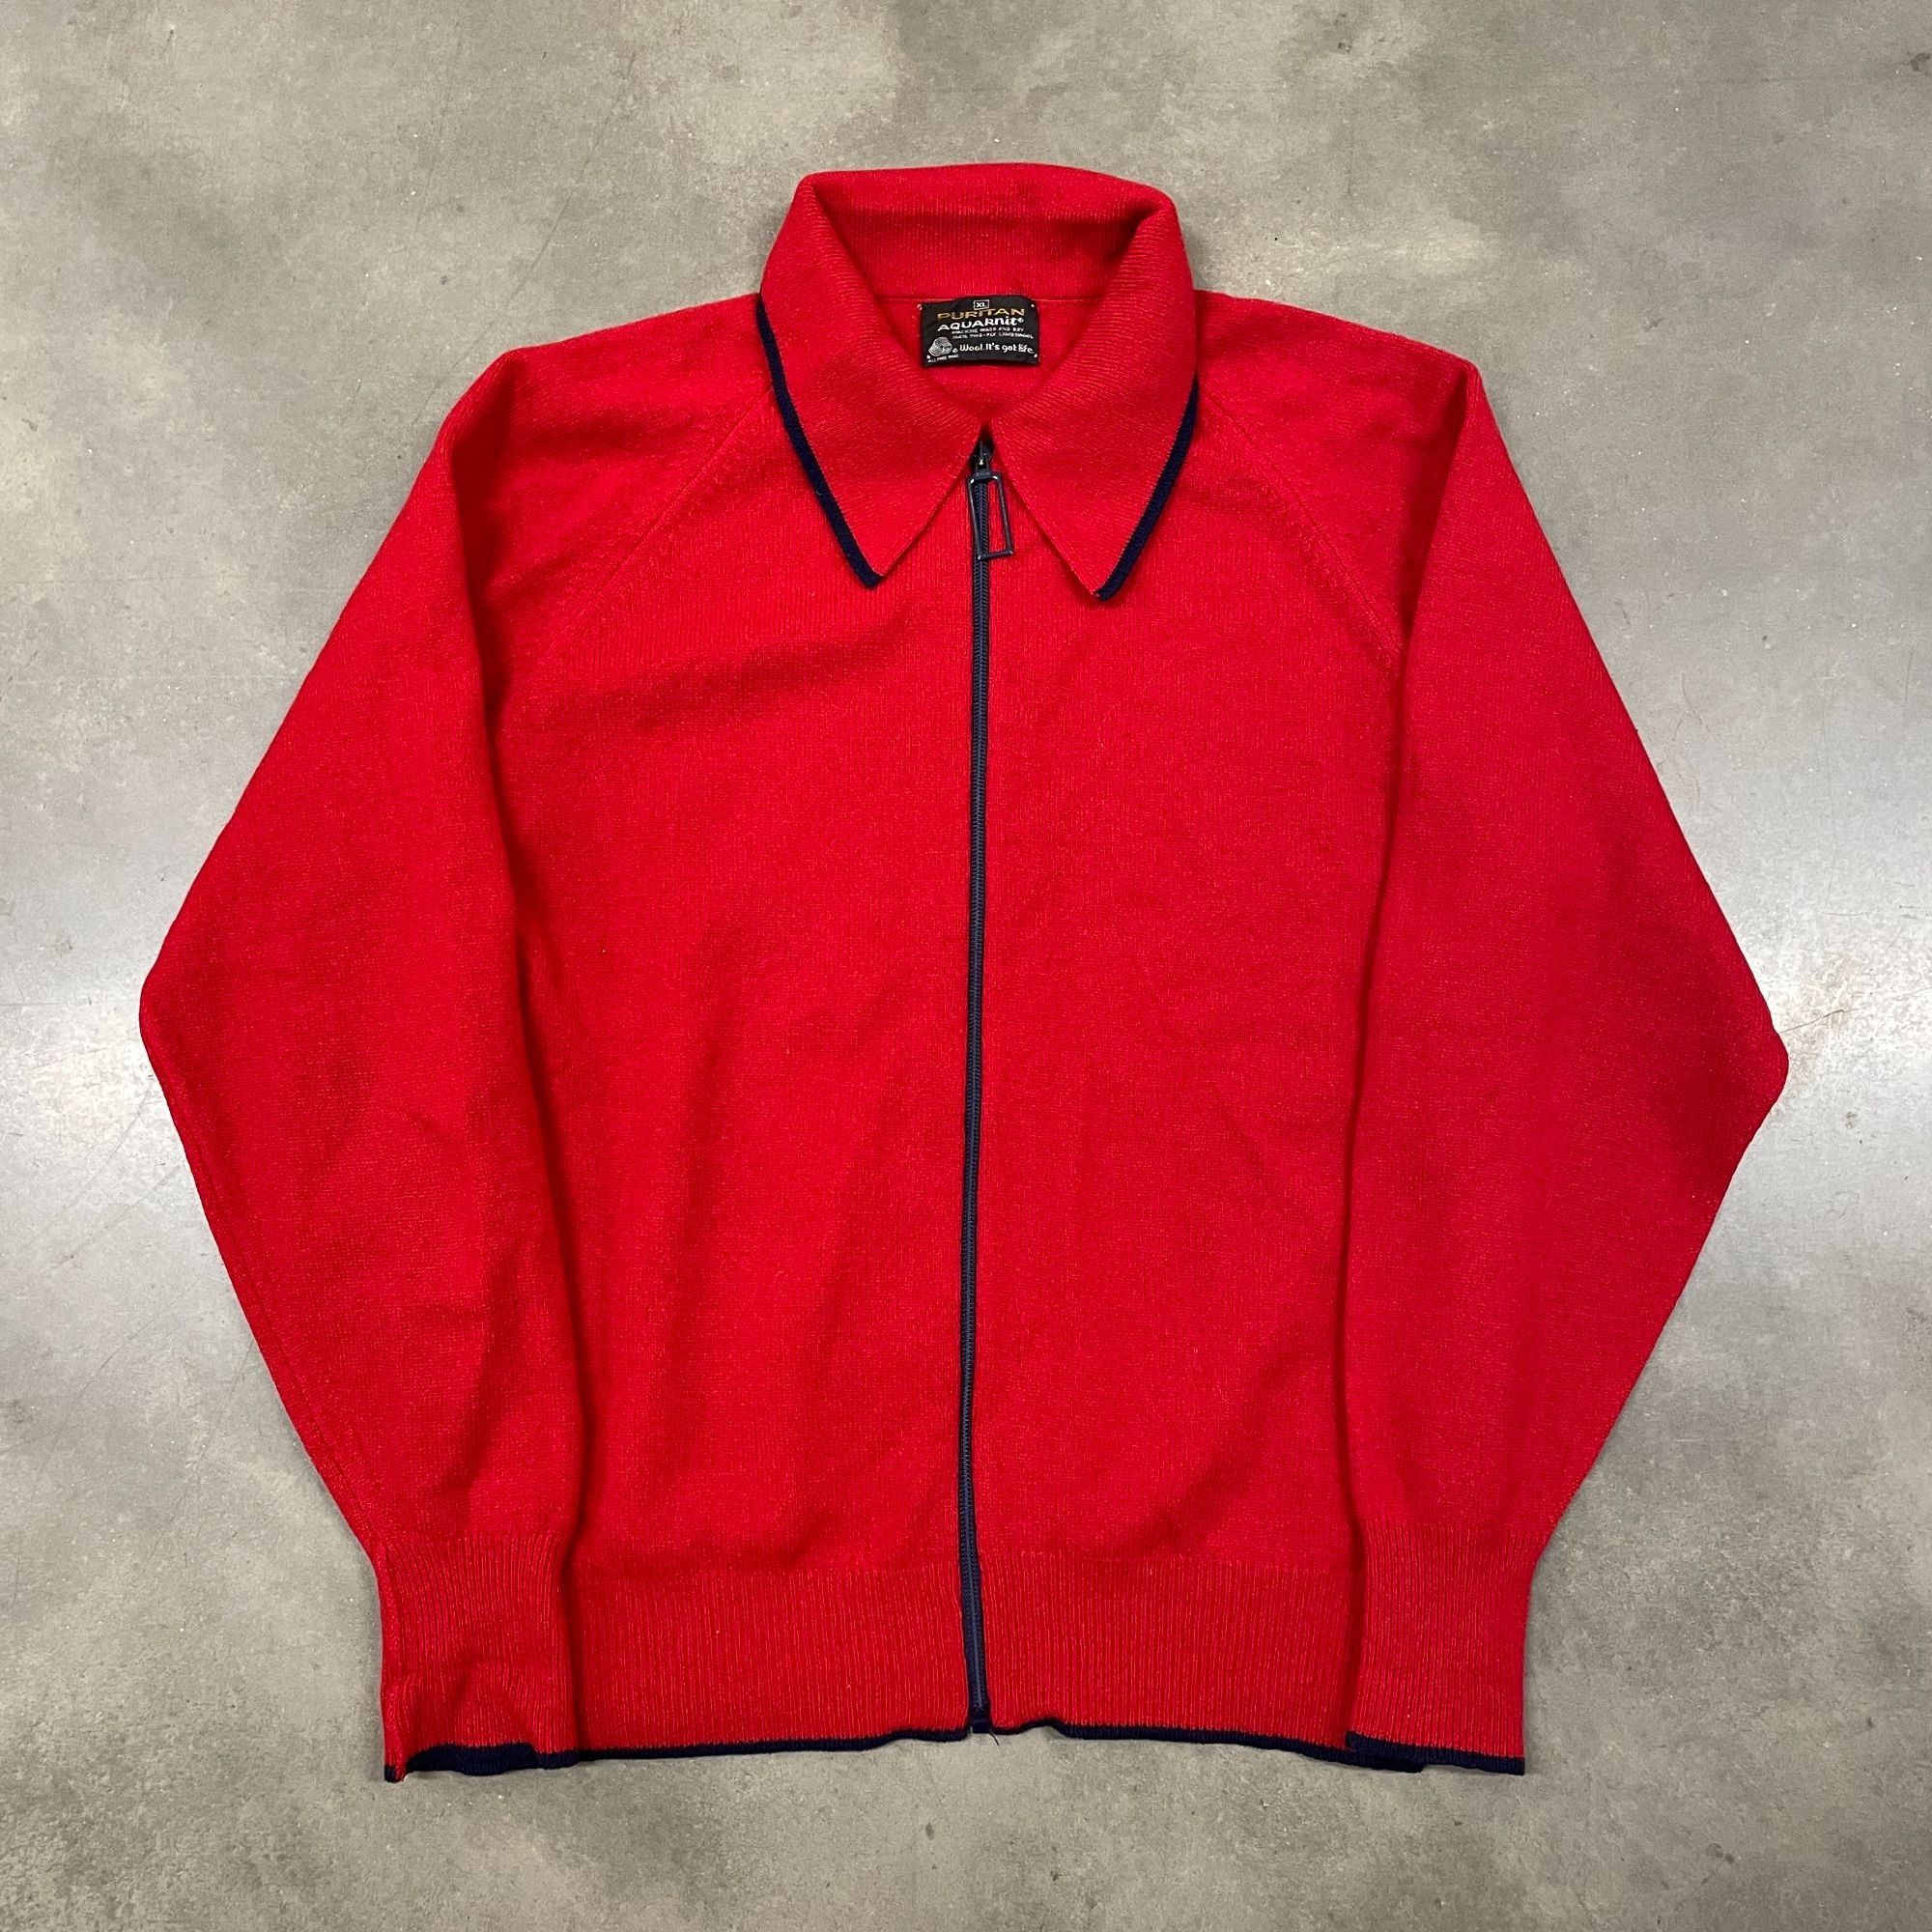 Vintage 60s VTG Red Wool Puritan Aquaknit Wool Zip Up Sweater XL Red Size US XL / EU 56 / 4 - 2 Preview